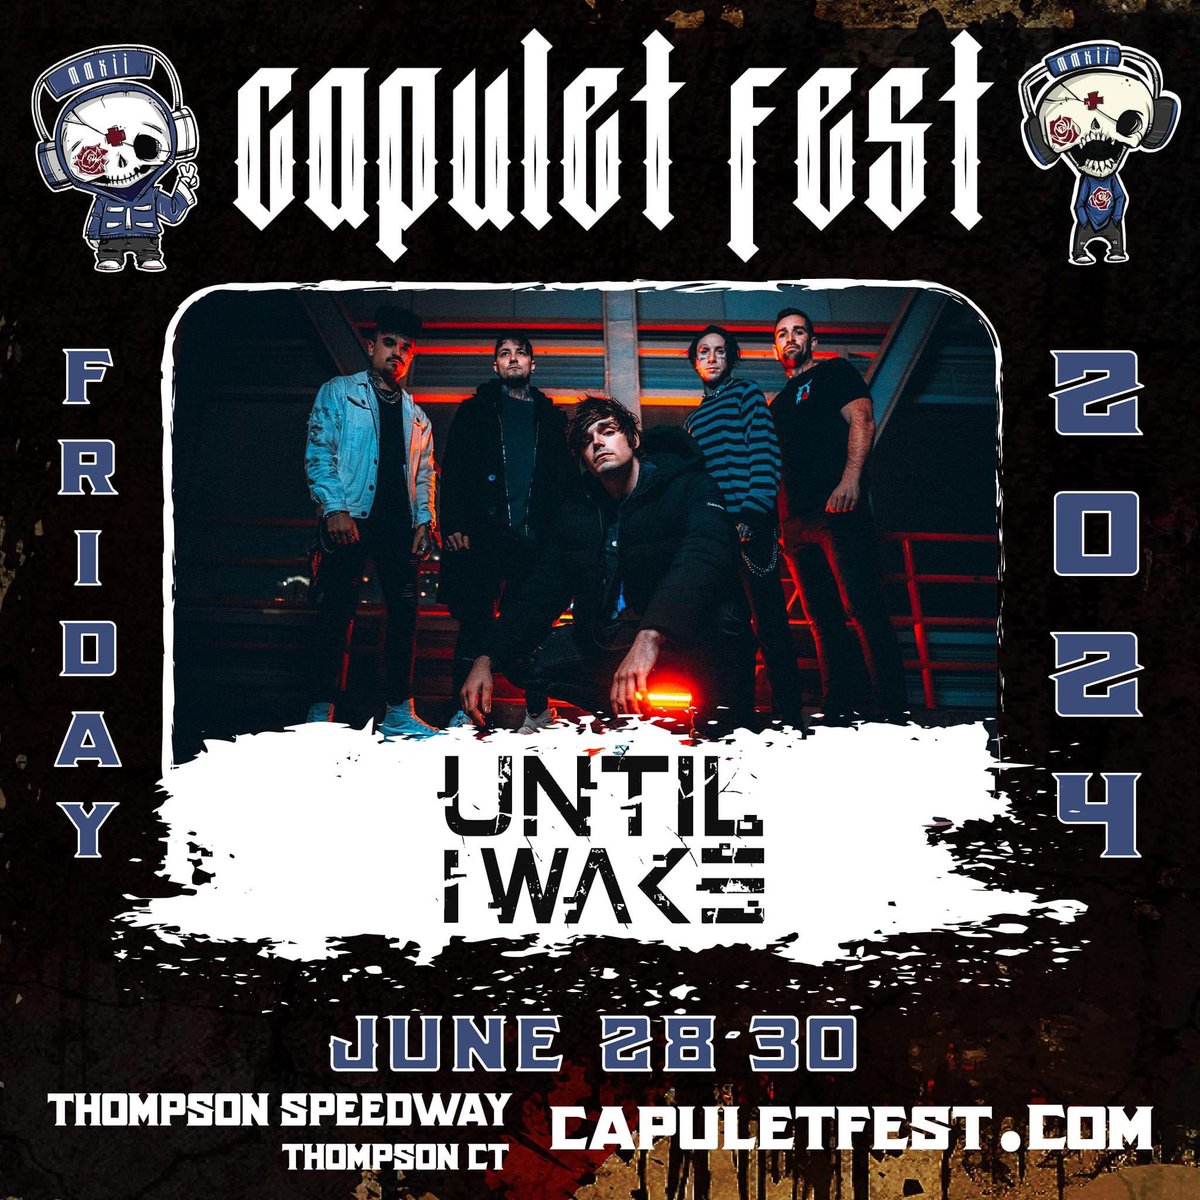 We will be performing Day 1 of this years Capulet Fest 🤘 Stoked to be back for round 2 to perform along w/ @augustburnsred , @blessthefall & many more! 🔥 🎟️ Tickets Available Below 🎟️ UNTILiWAKE.com